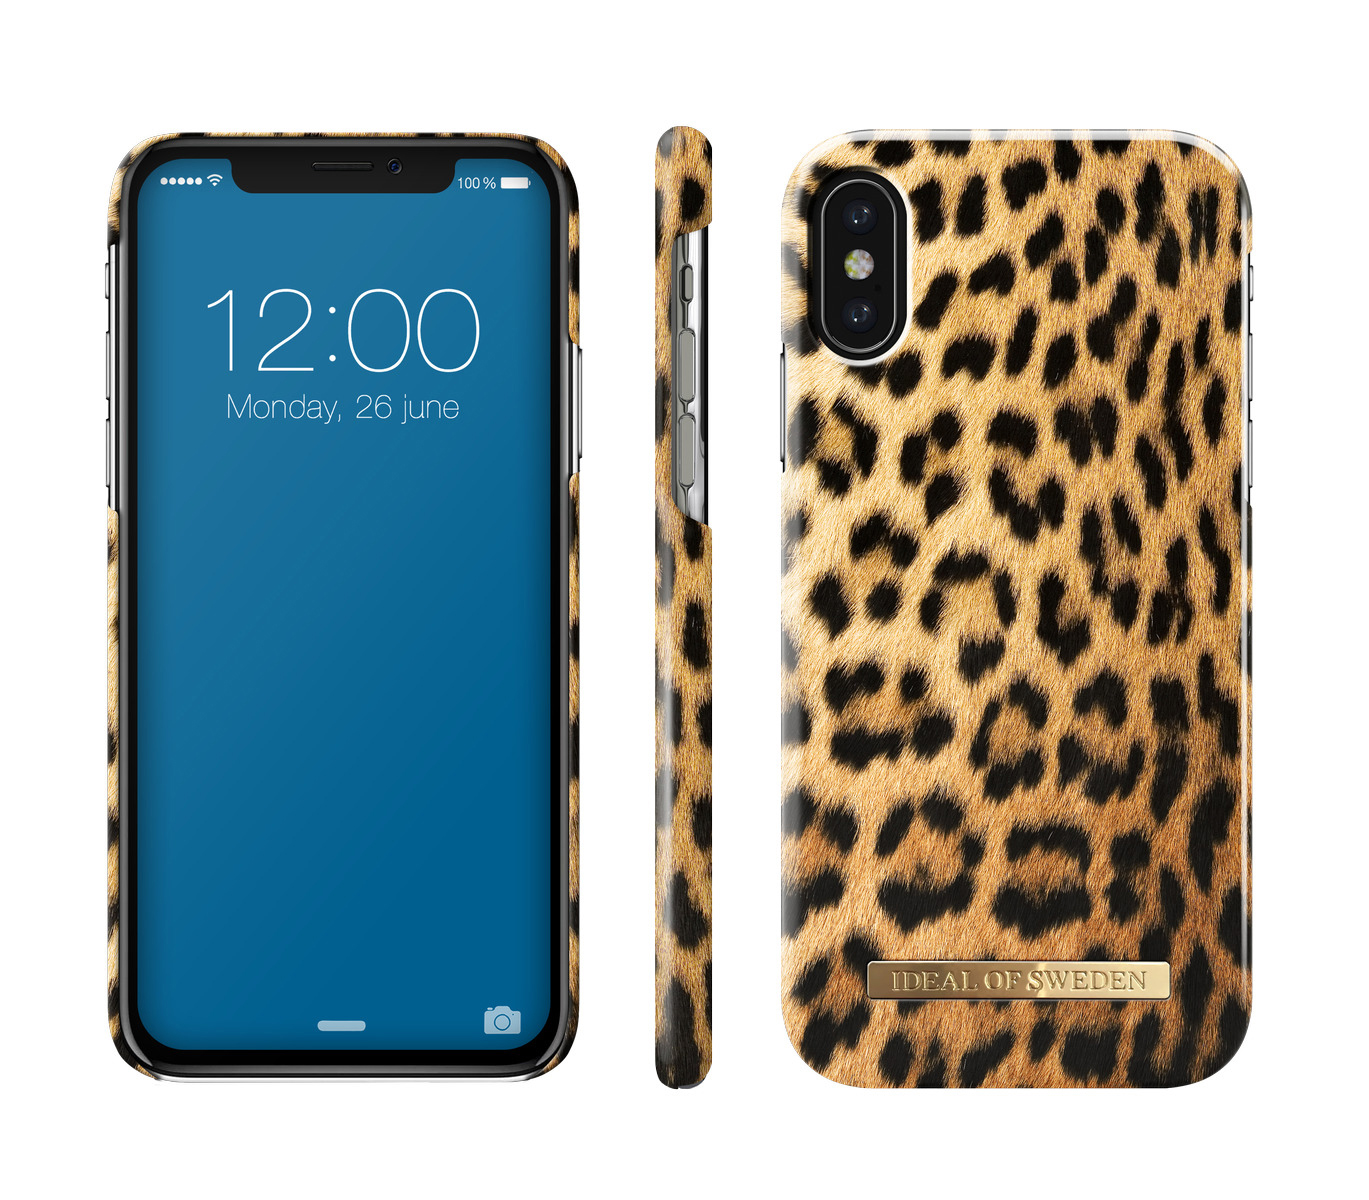 IDEAL Fashion, Apple, Backcover, SWEDEN Leopard X, iPhone Wild OF